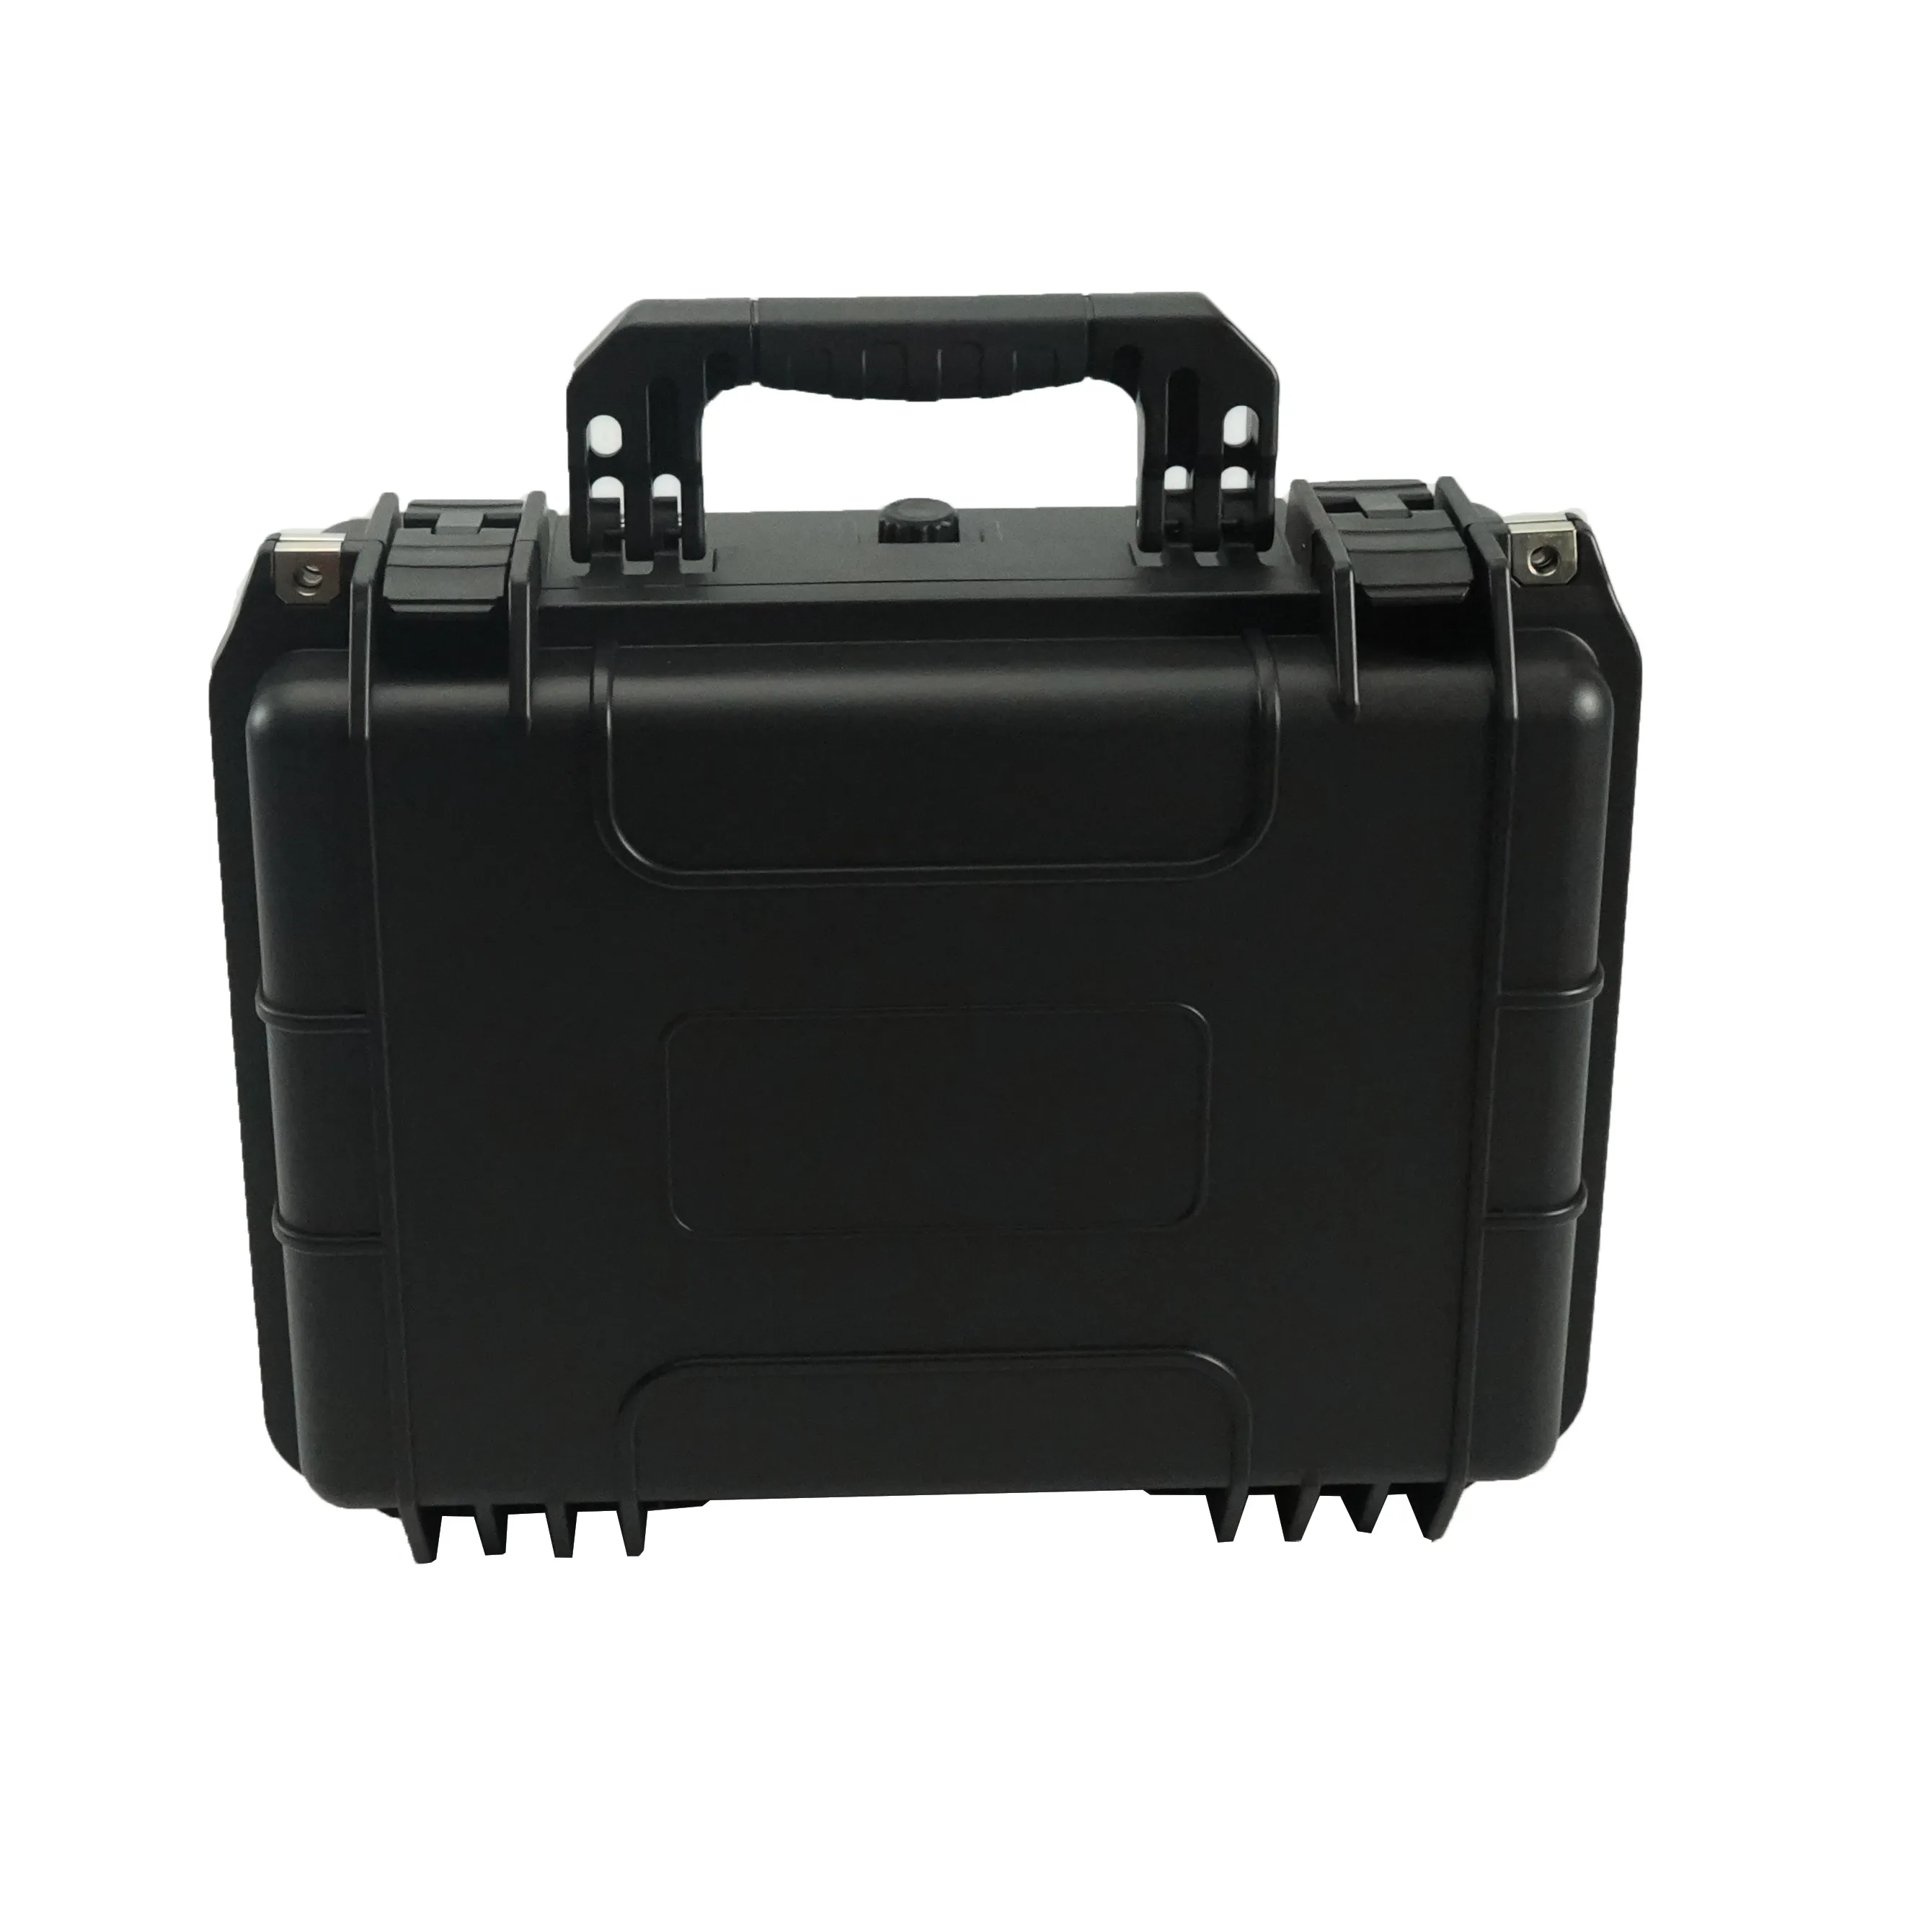 409.5*332.5*165mm small waterproof equipment case hard plastic rotomolded box high quality carrying tool case